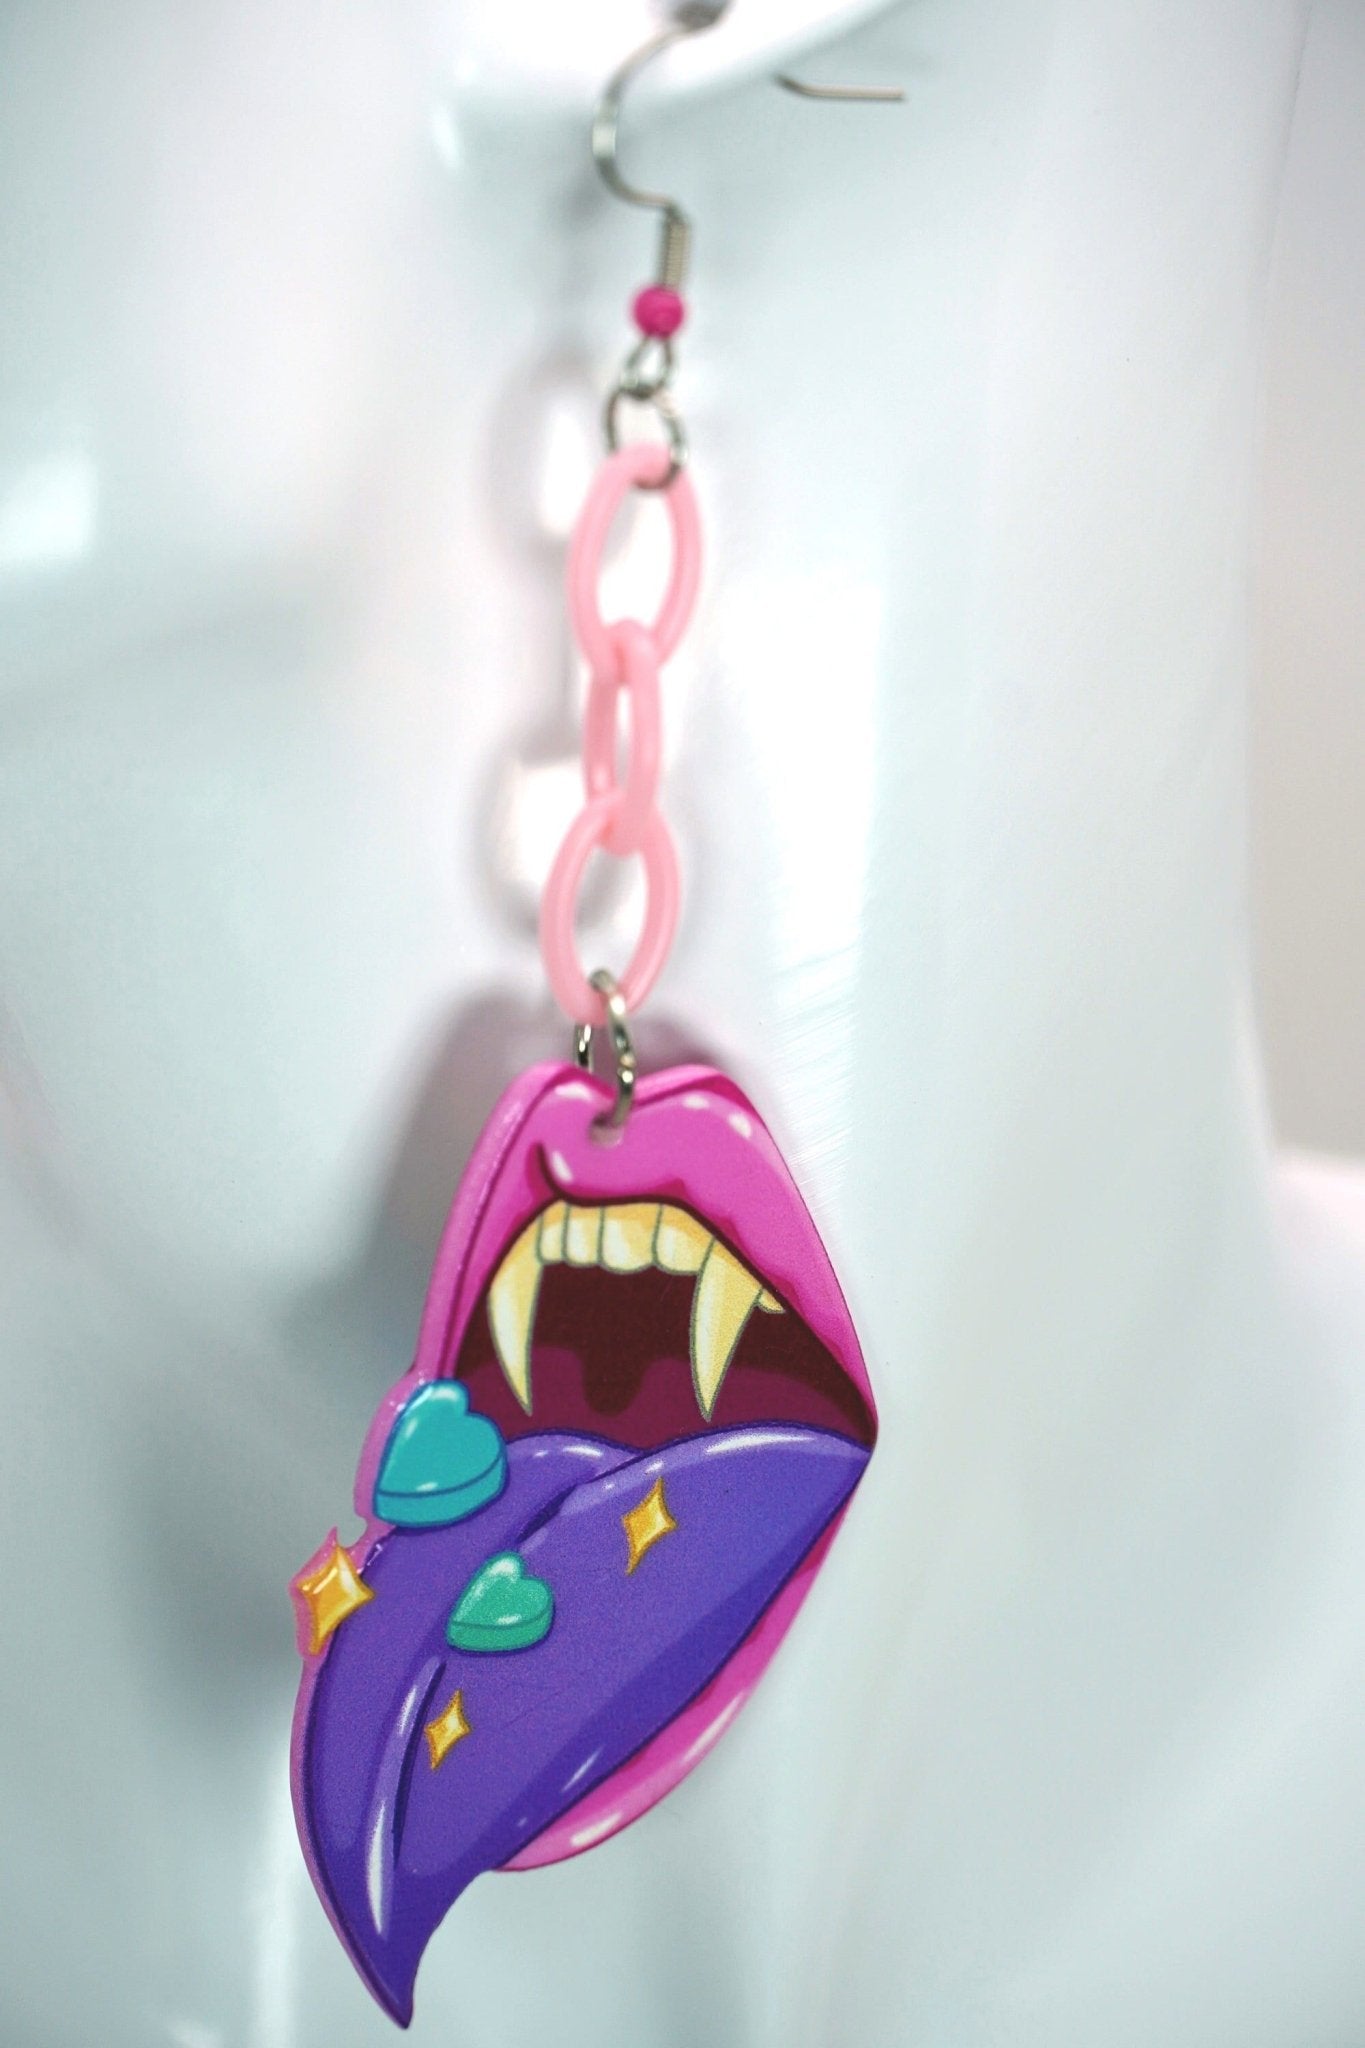 Vampire Mouth with Candy Pills Earrings, y2k Earrings, Neon Rave, Pastel Goth Harajuku Style - Dekowaii Jewelry Company